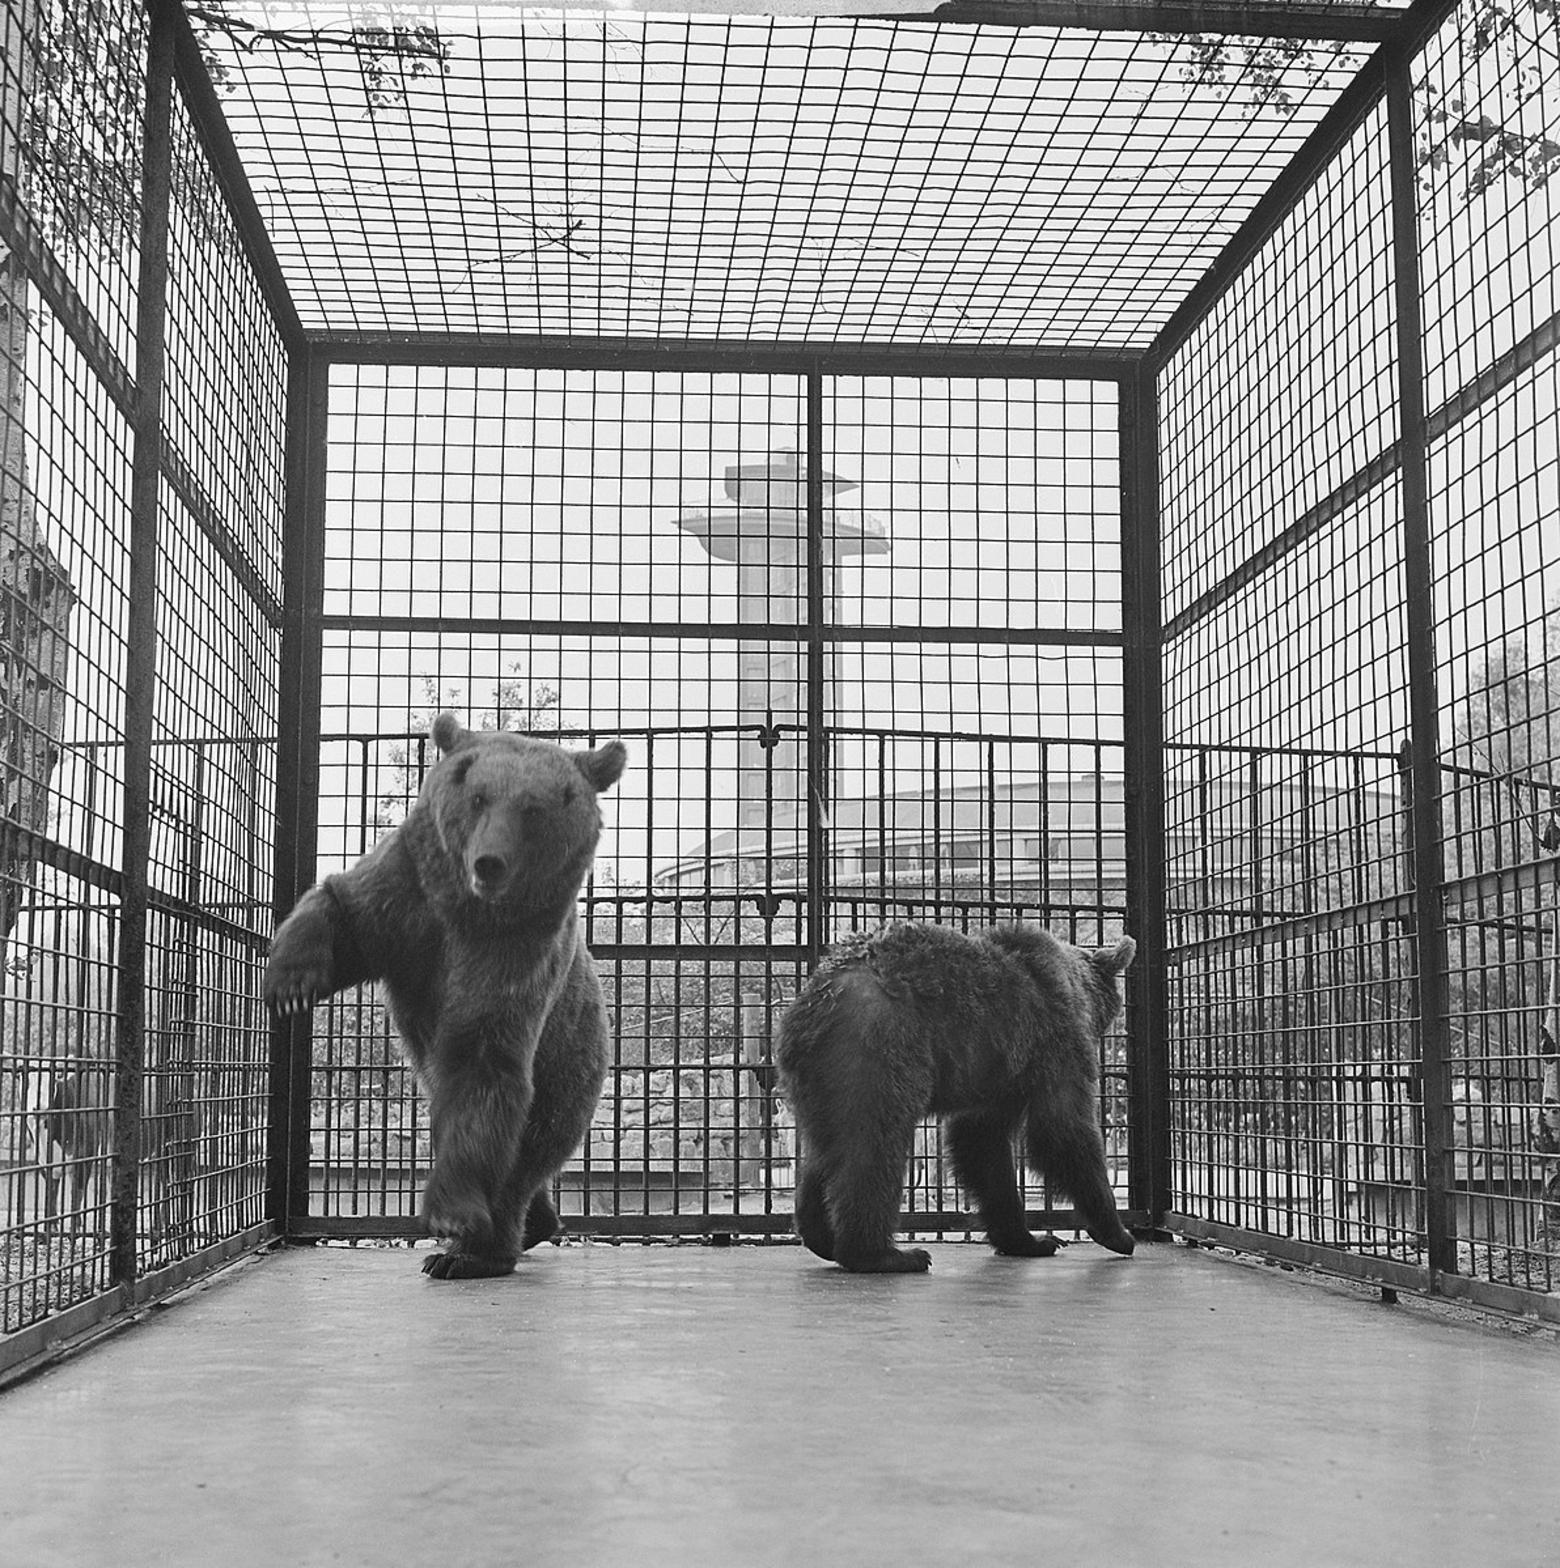 Photograph of caged brown bears in a zoo by Eric Koch, part of collection of the Dutch National Archives, used with permission via Creative Commons license.  